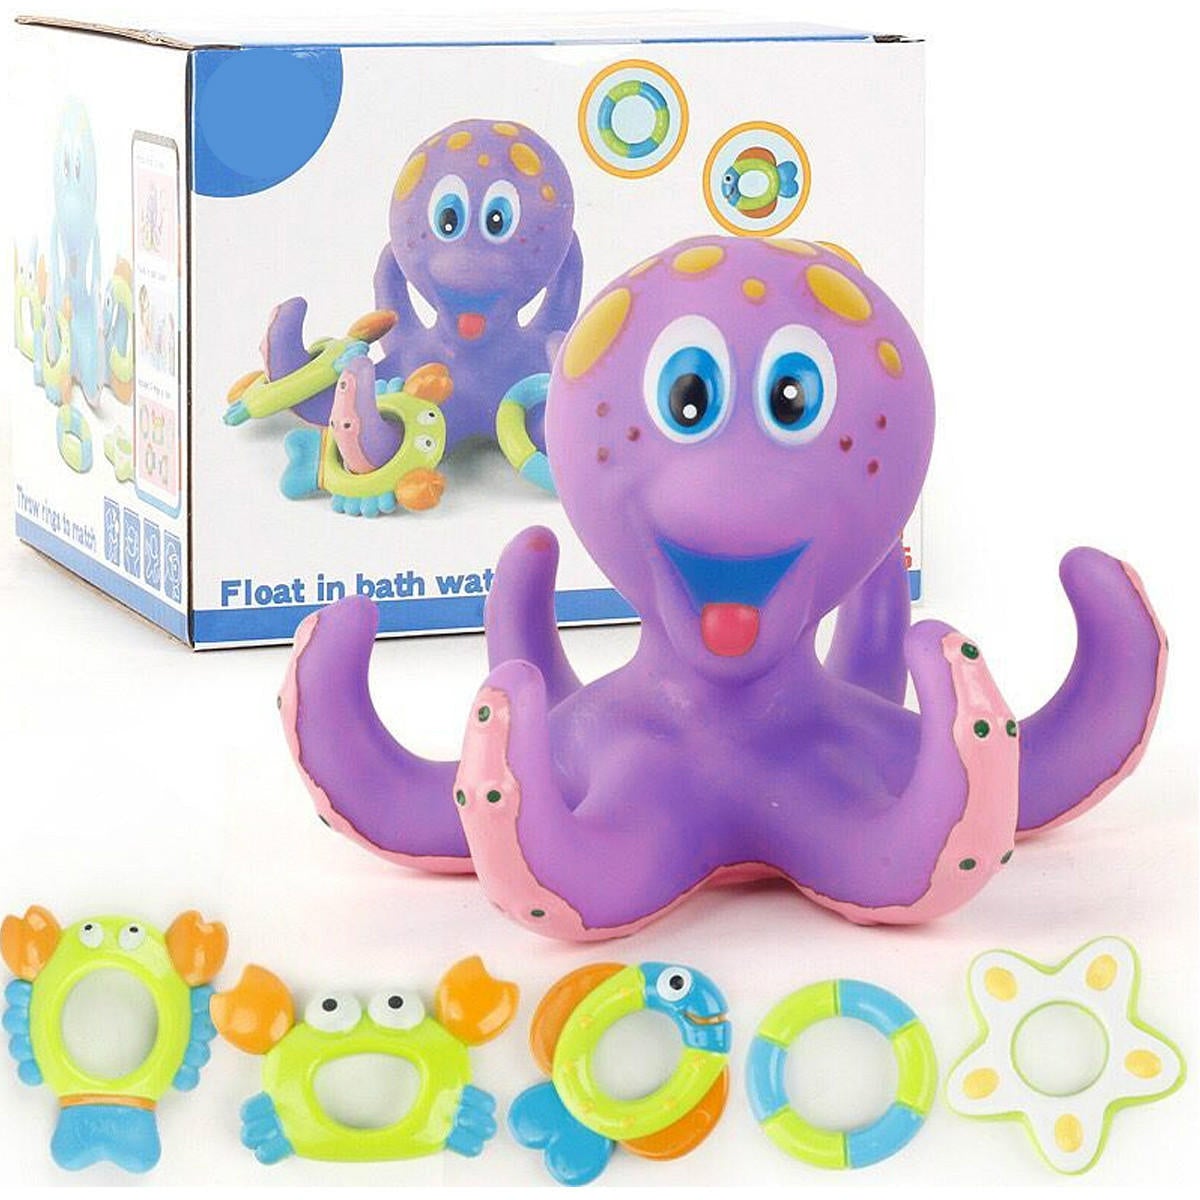 Floating Soft Rubber ABS Baby Bath Toys with 5 Marine Animal Rings Cast Circle for Kids Gift